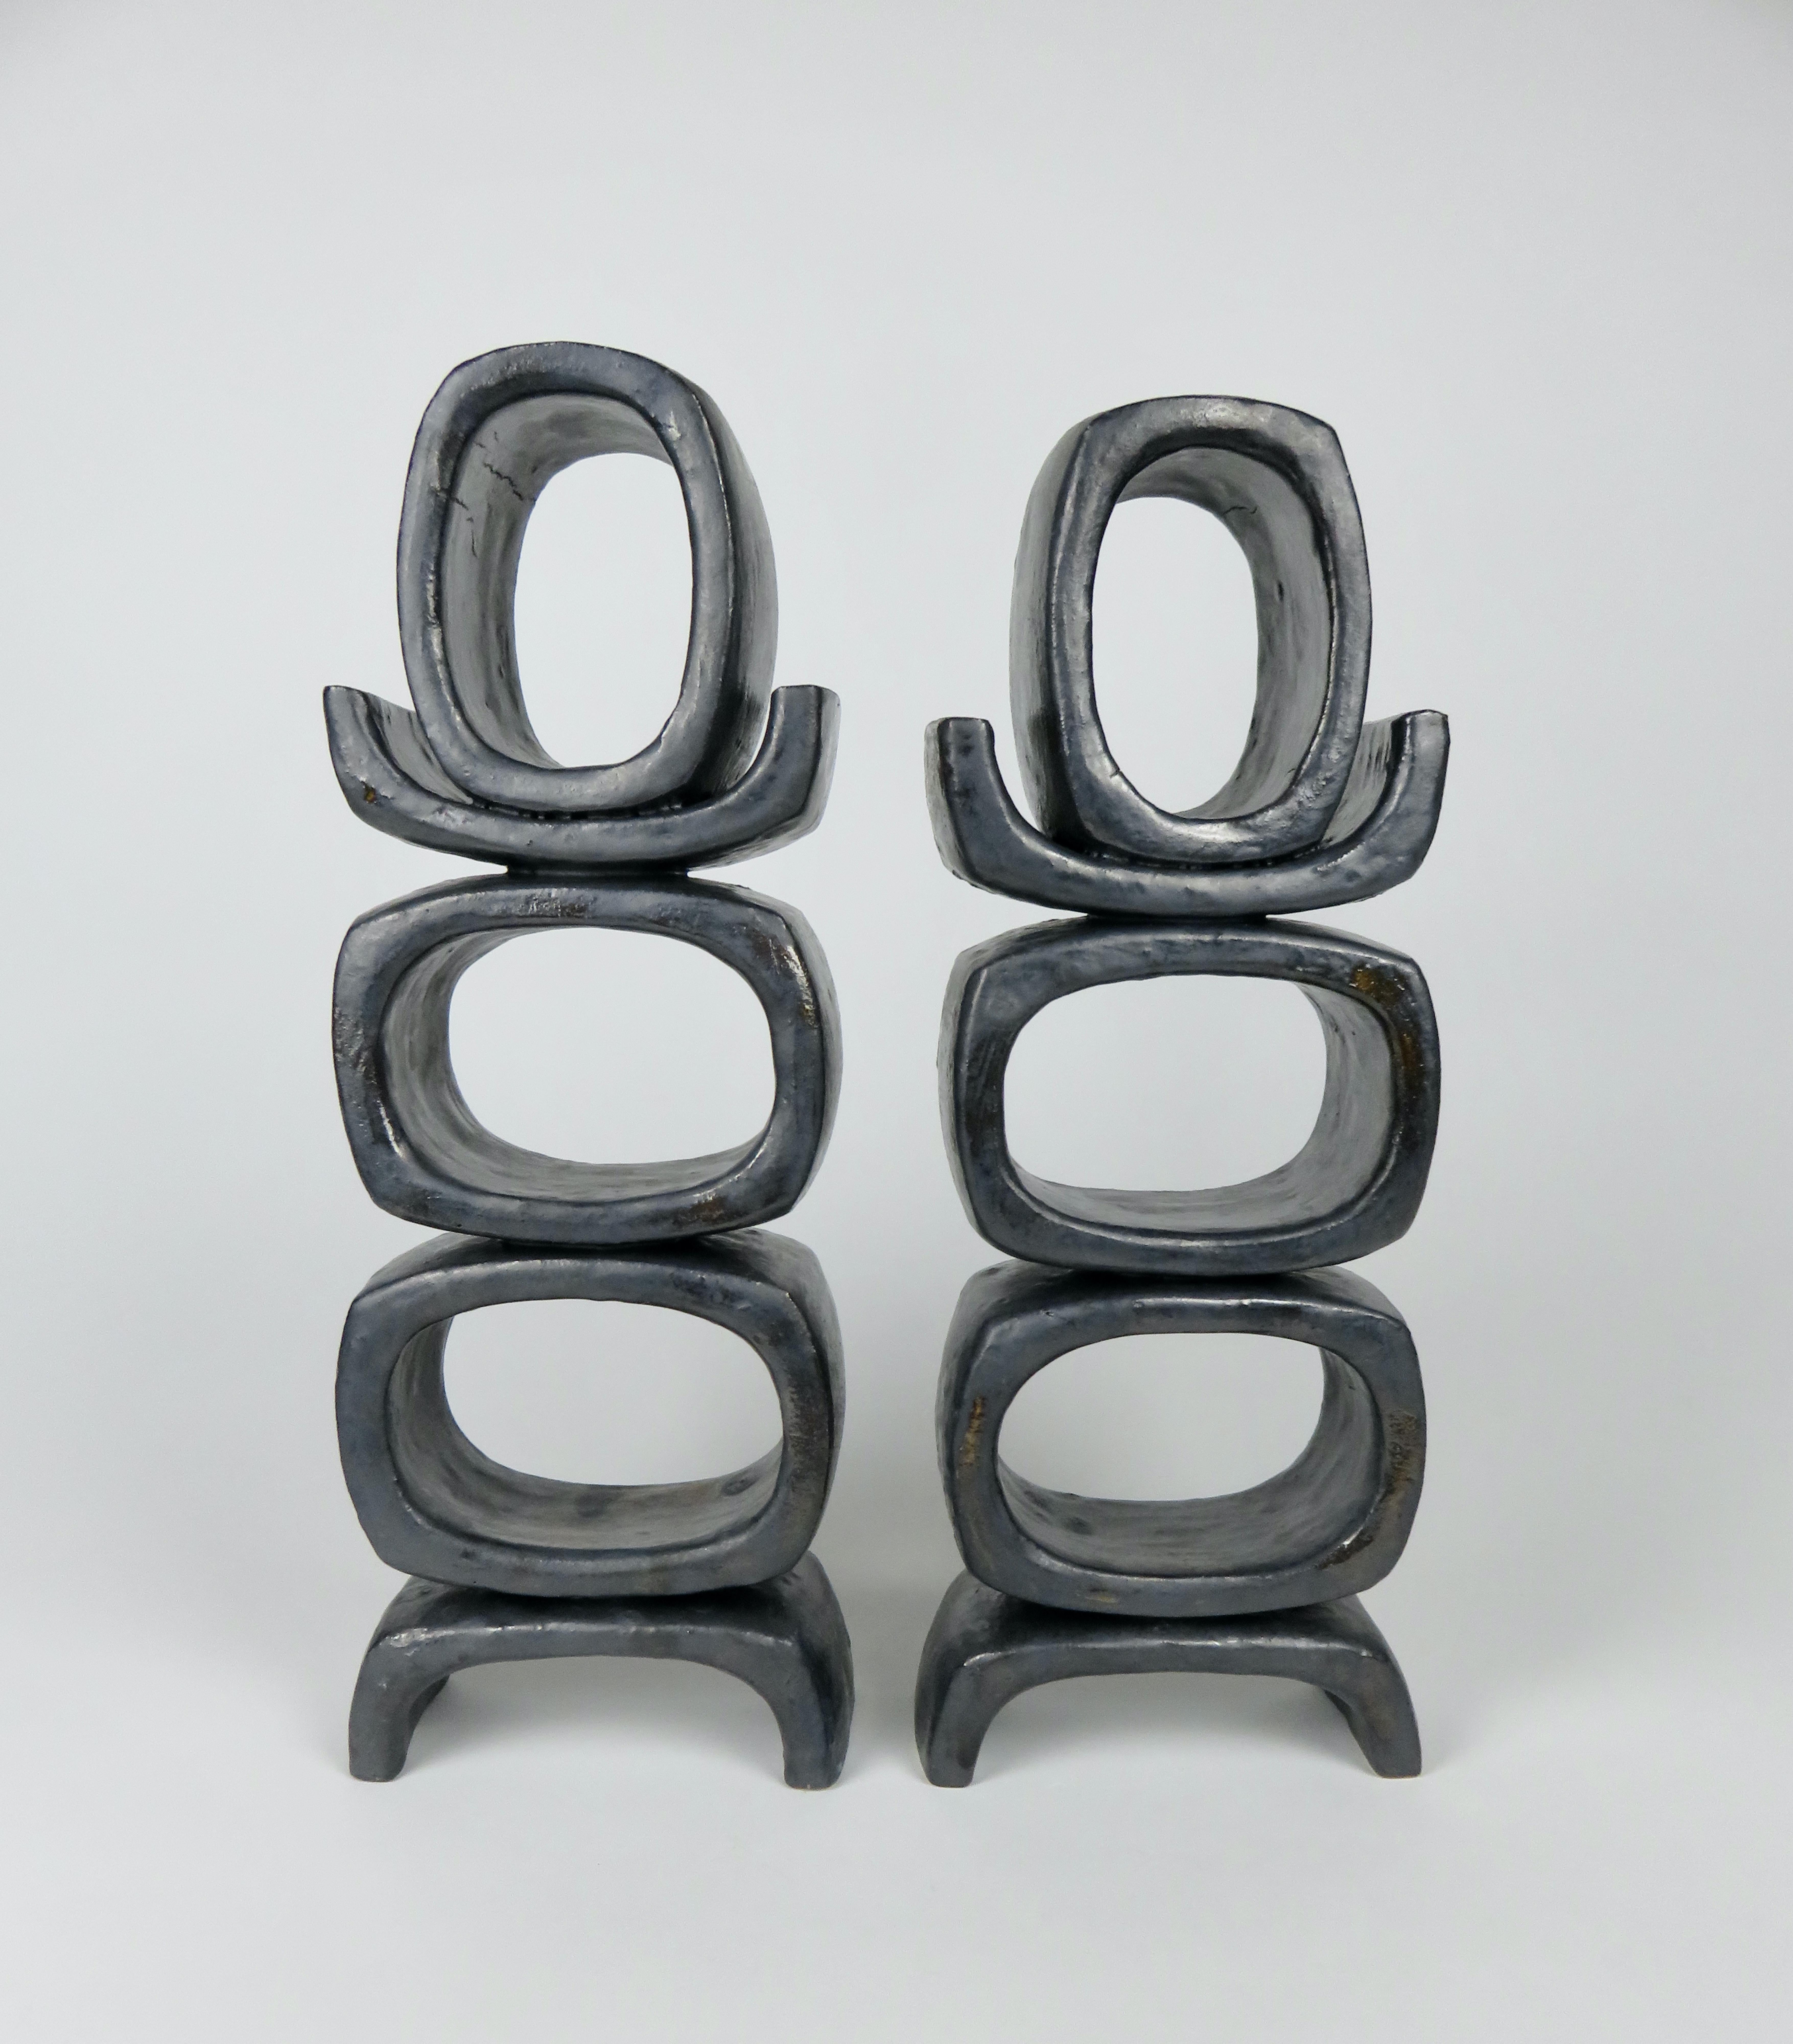 Short Standing TOTEM, Rectangular Ovals on Angled Legs in Metallic Glazed Clay For Sale 8